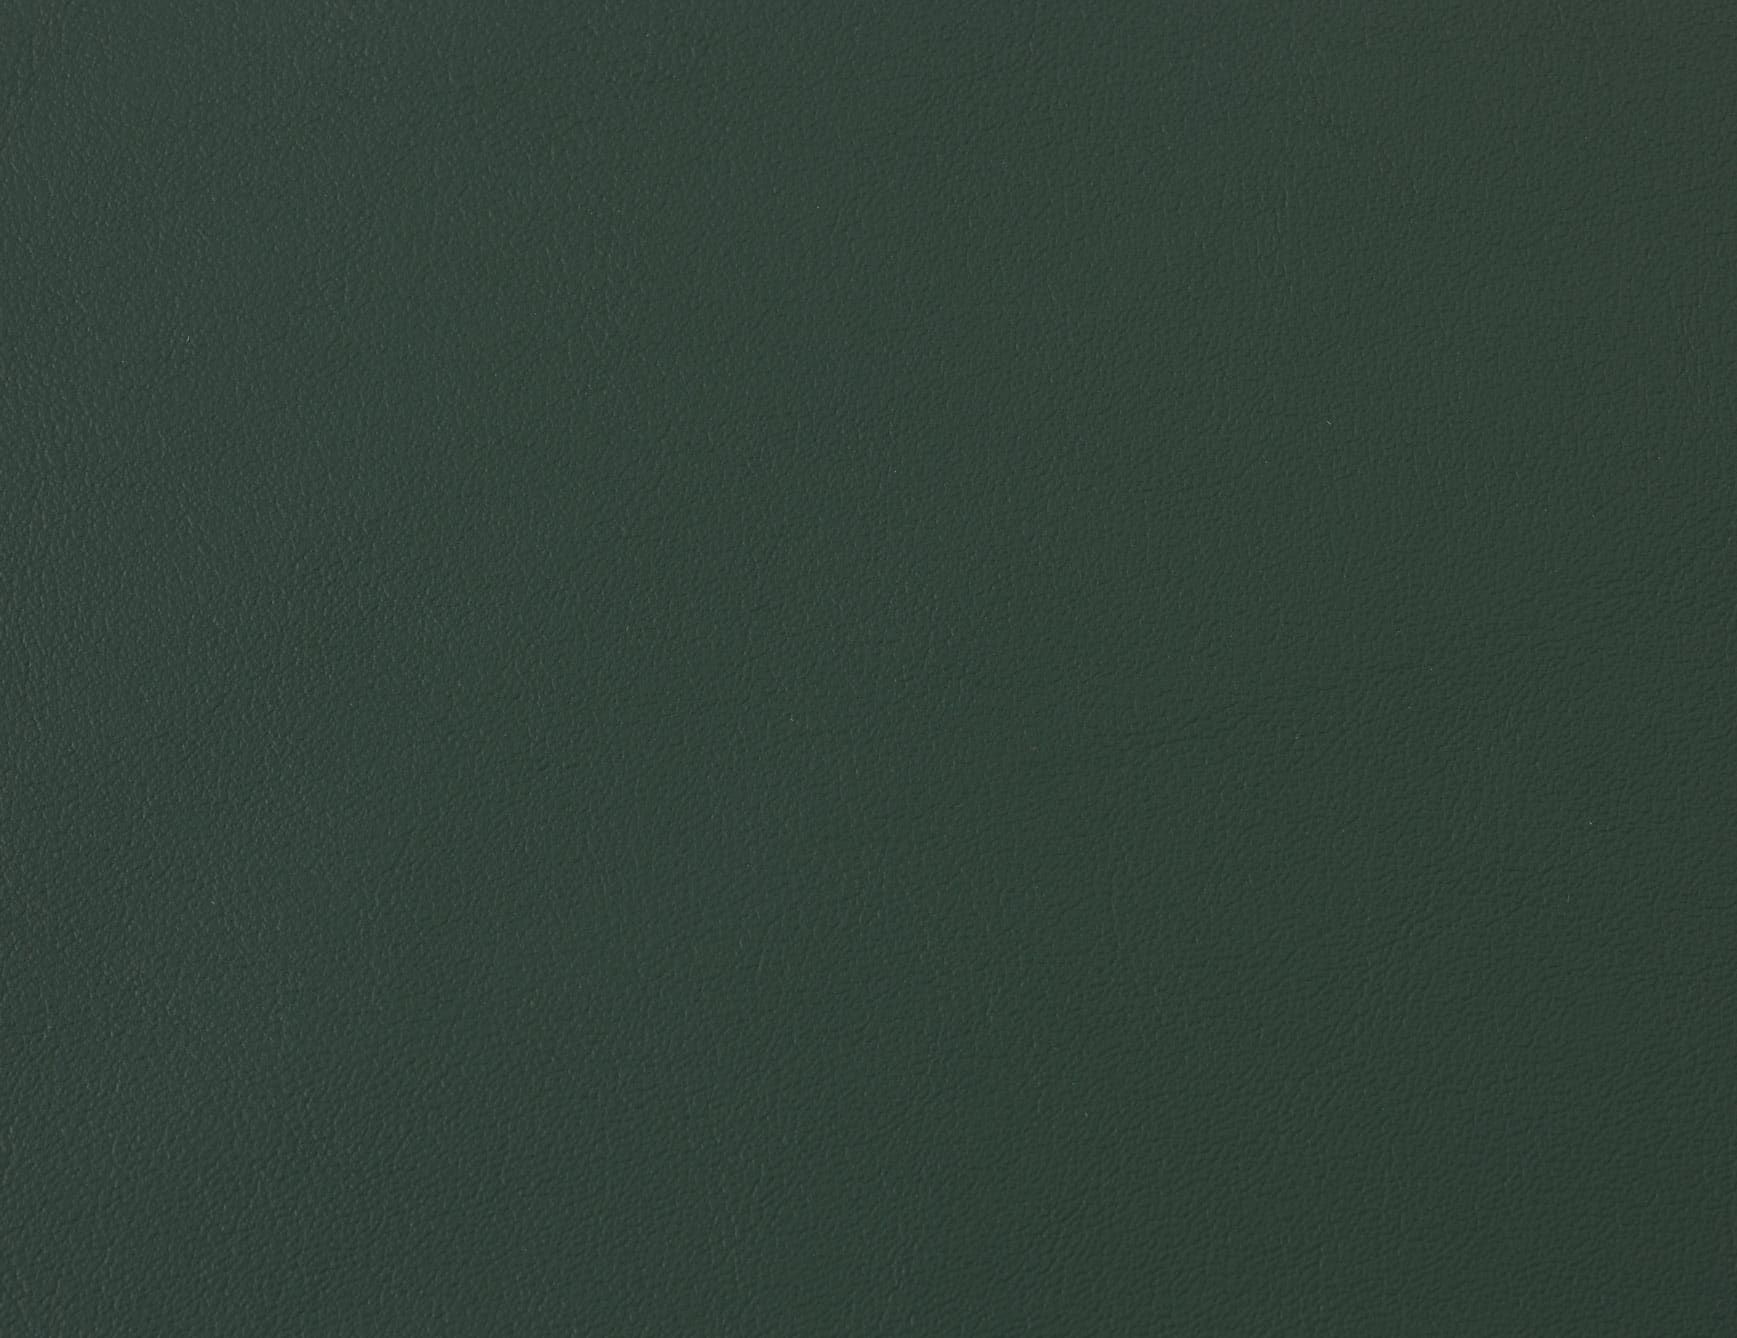 Abete contemporary Italian upholstery leather in green